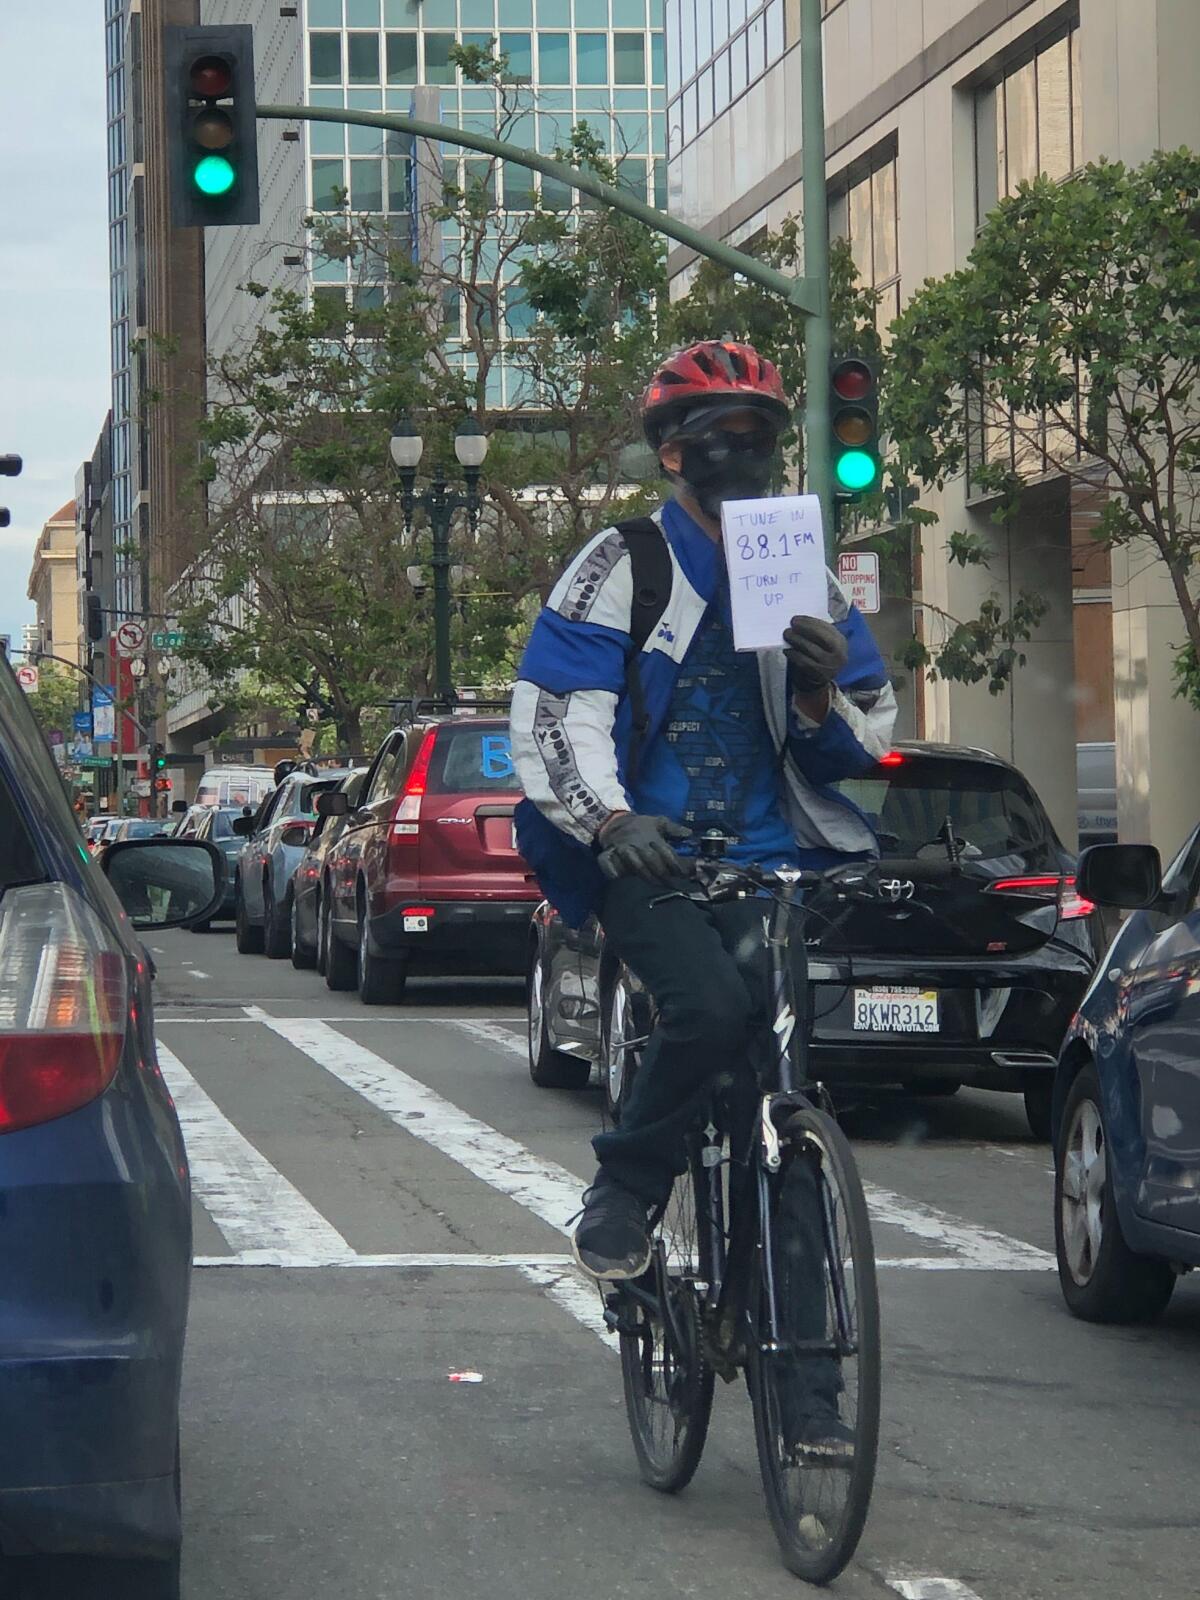 A cyclist directs protesters to tune to 88.1 FM during Sunday's caravan through Oakland.